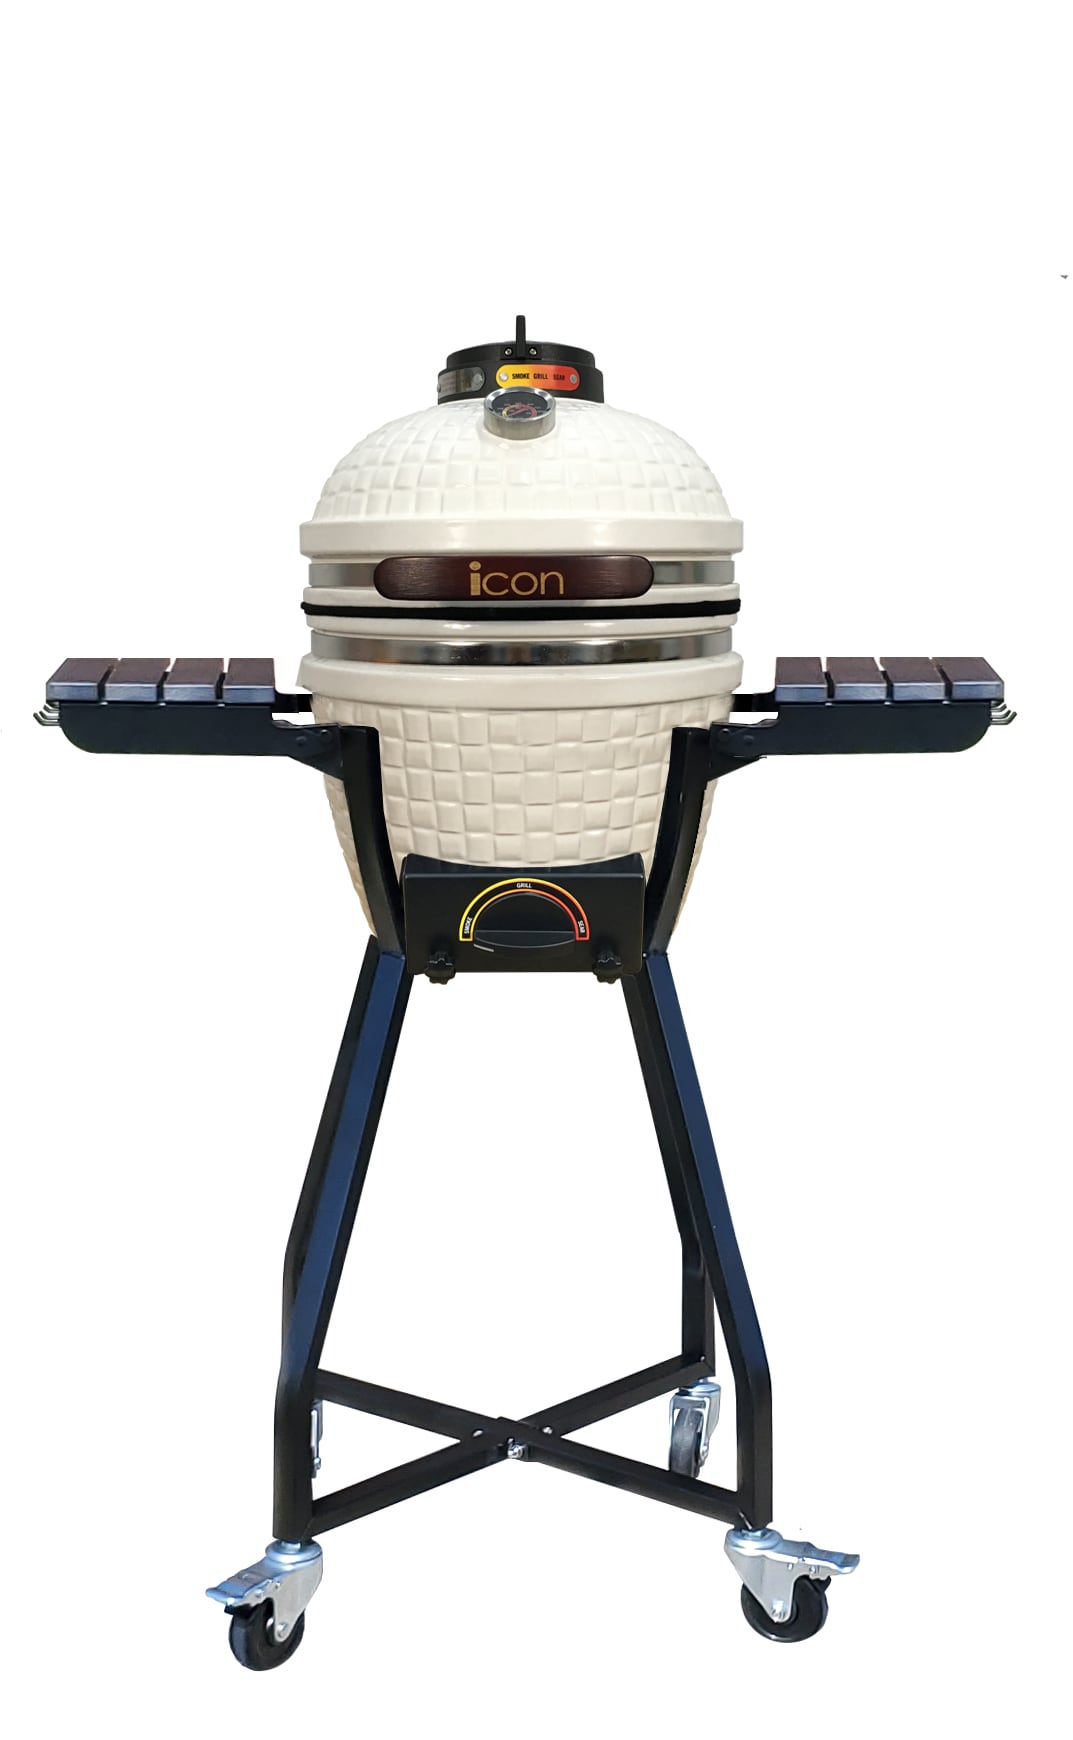 Accessories - Grill, BBQ, Wok on the Vision Pro & Classic B